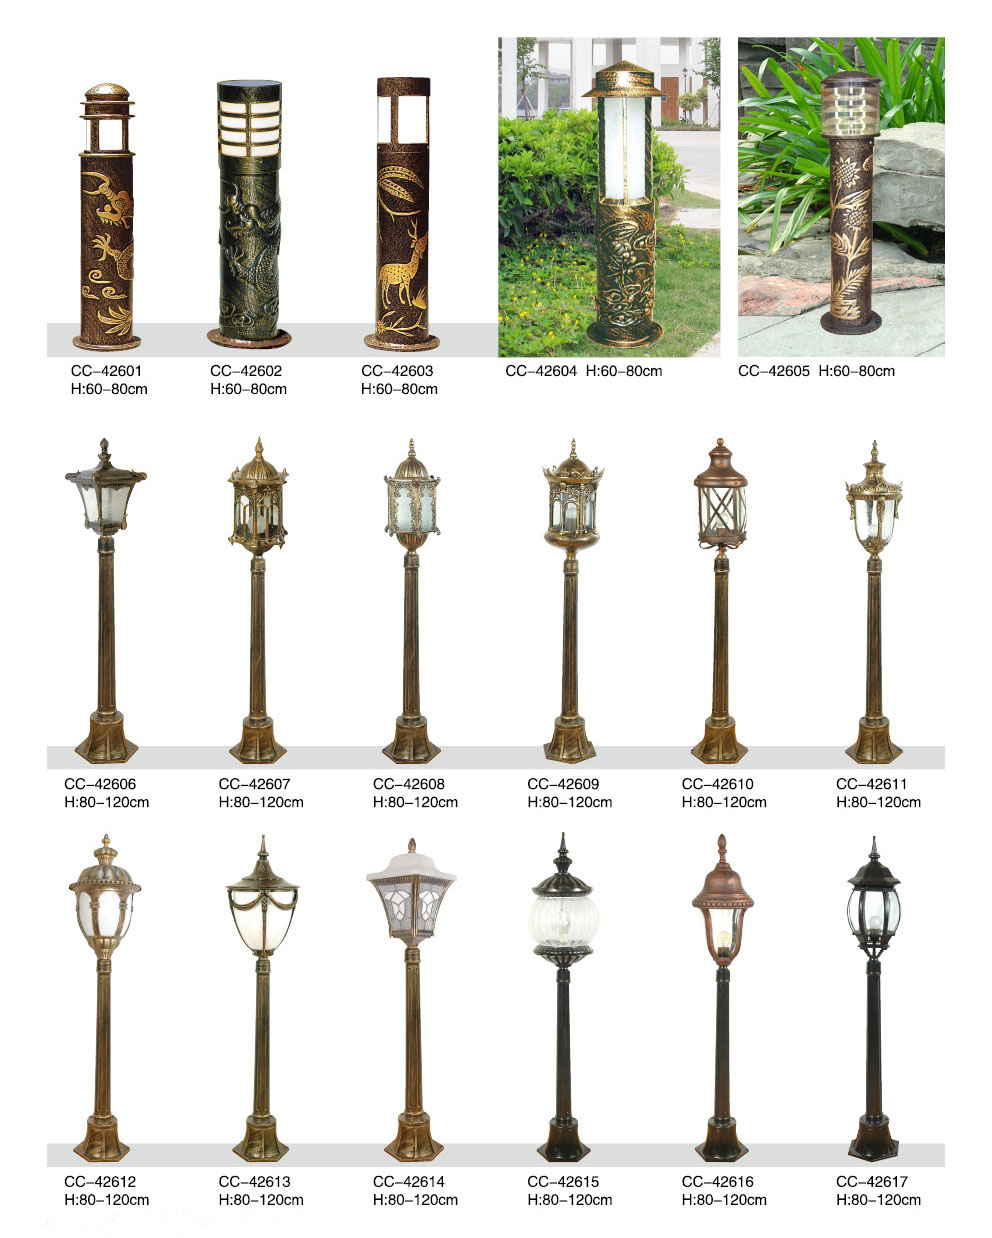 More style classical lawn lamp